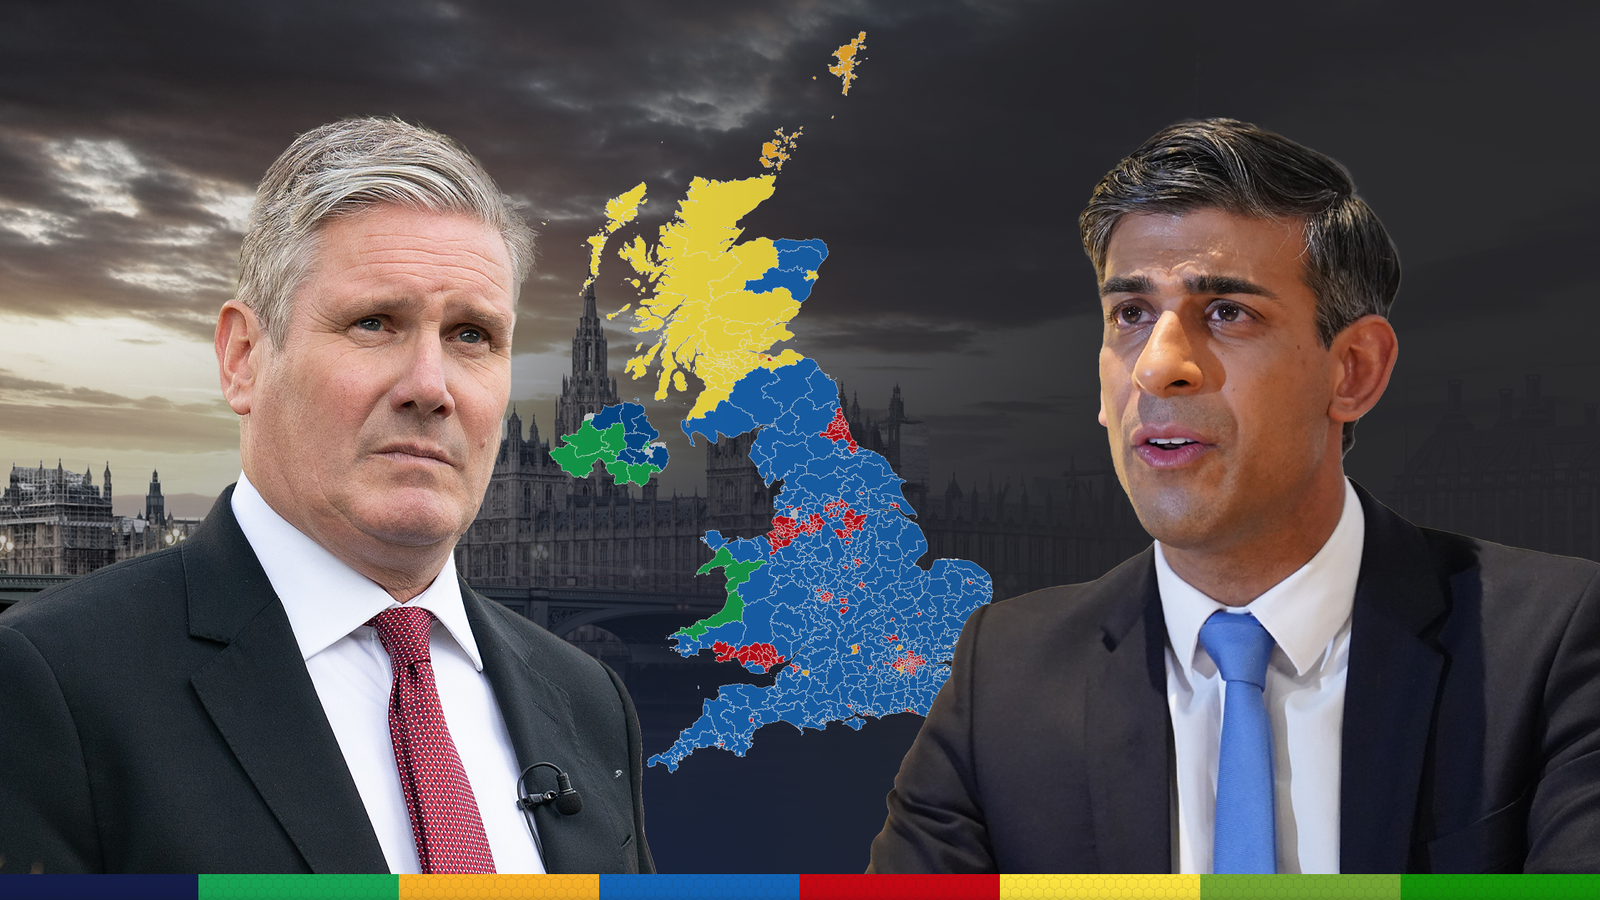 The constituencies and voters Starmer needs to win over to become PM